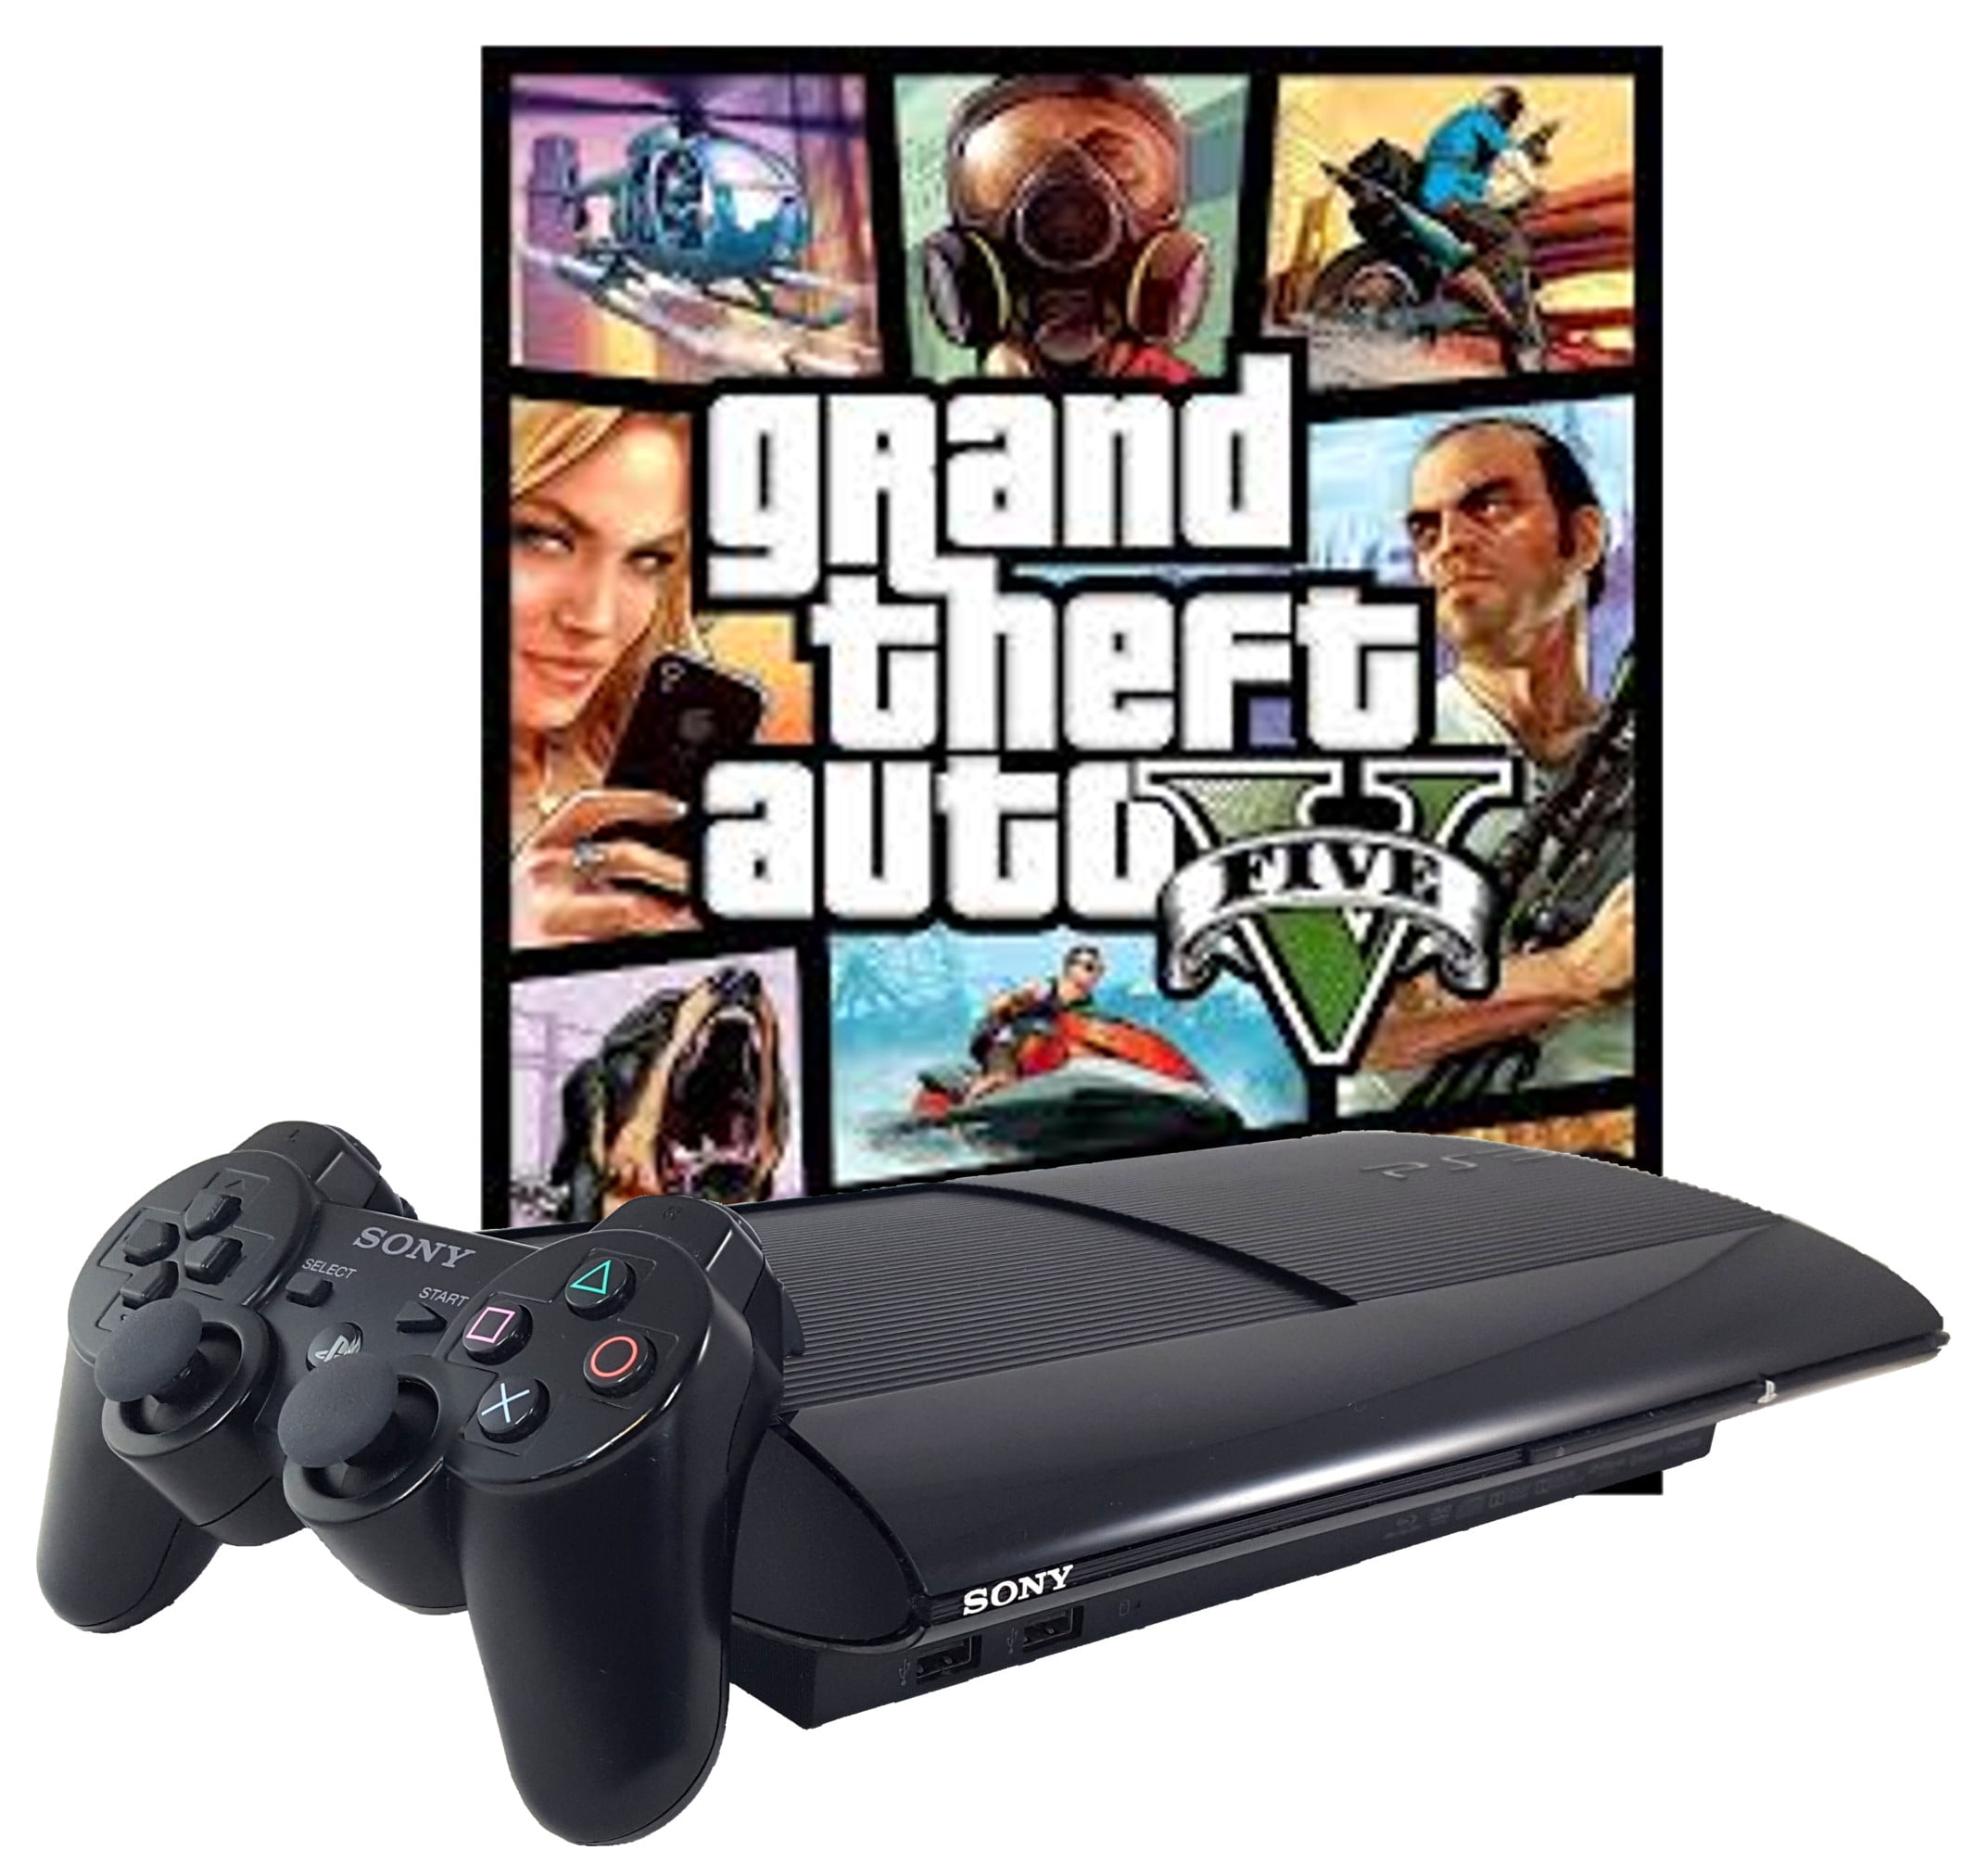 Grand Theft Auto V GTA 5 PS3 game Brand New - video gaming - by owner -  electronics media sale - craigslist